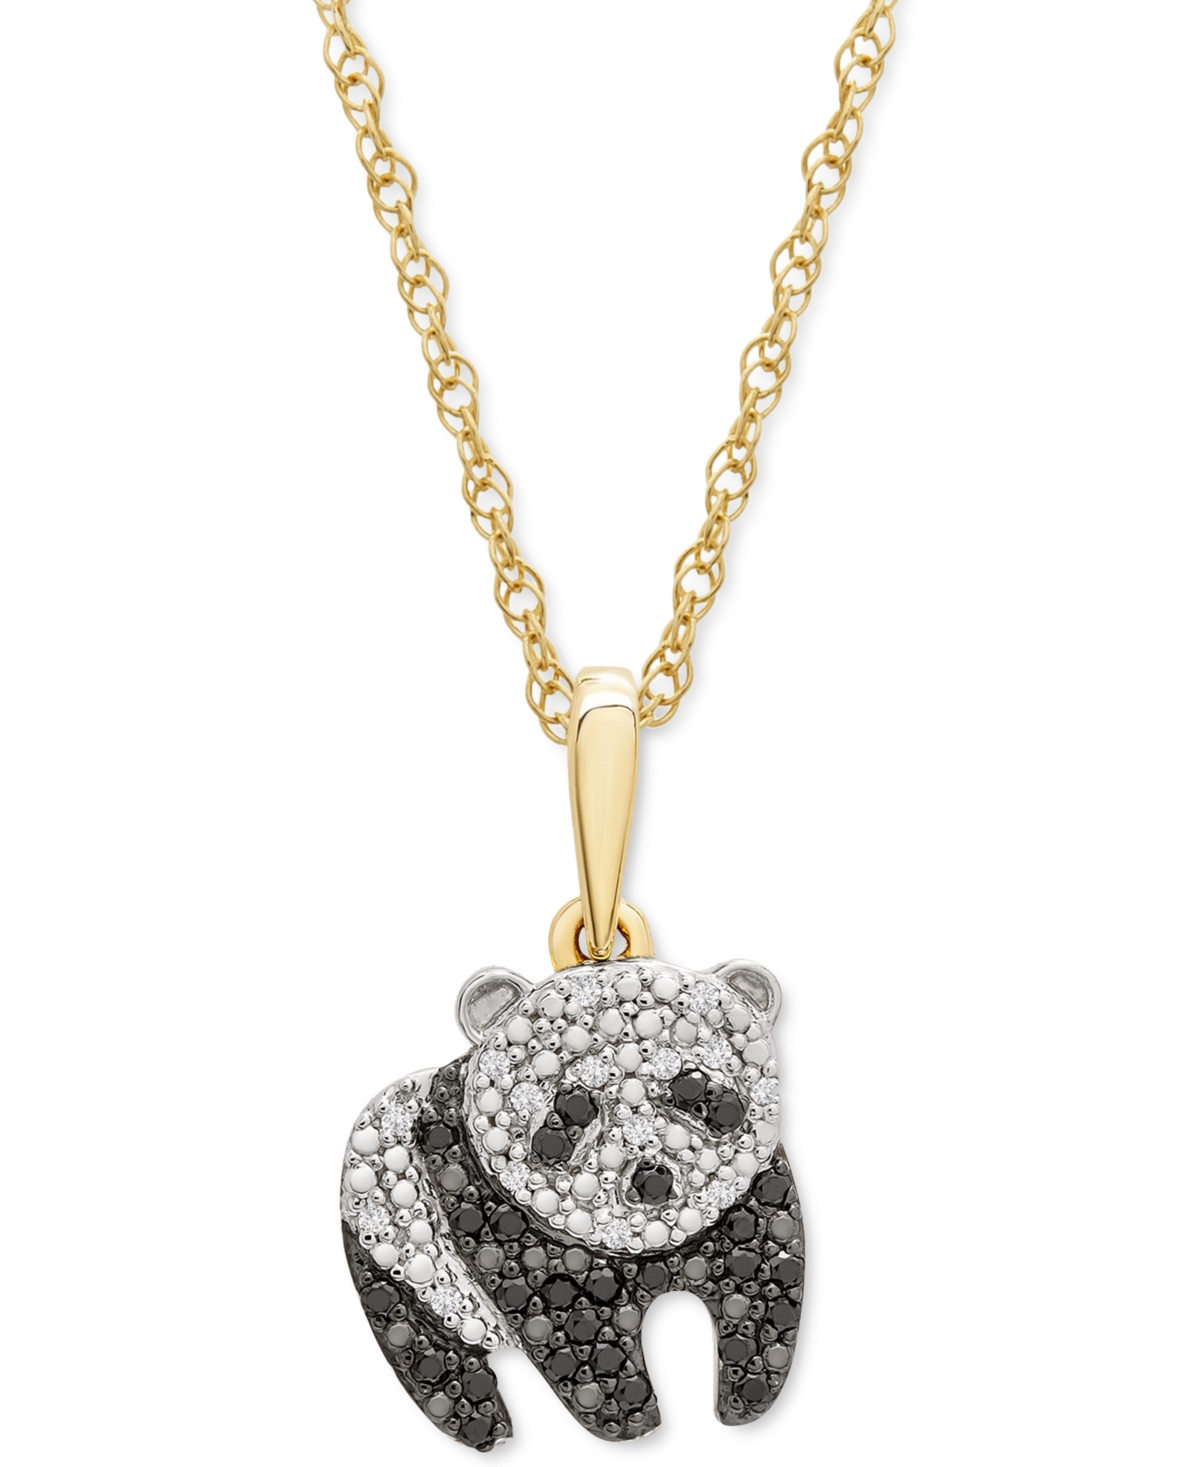 Black & White Diamond Panda 18" Pendant Necklace (1/10 ct. t.w.) in 10k Gold, Created for Macy's - Yellow Gold